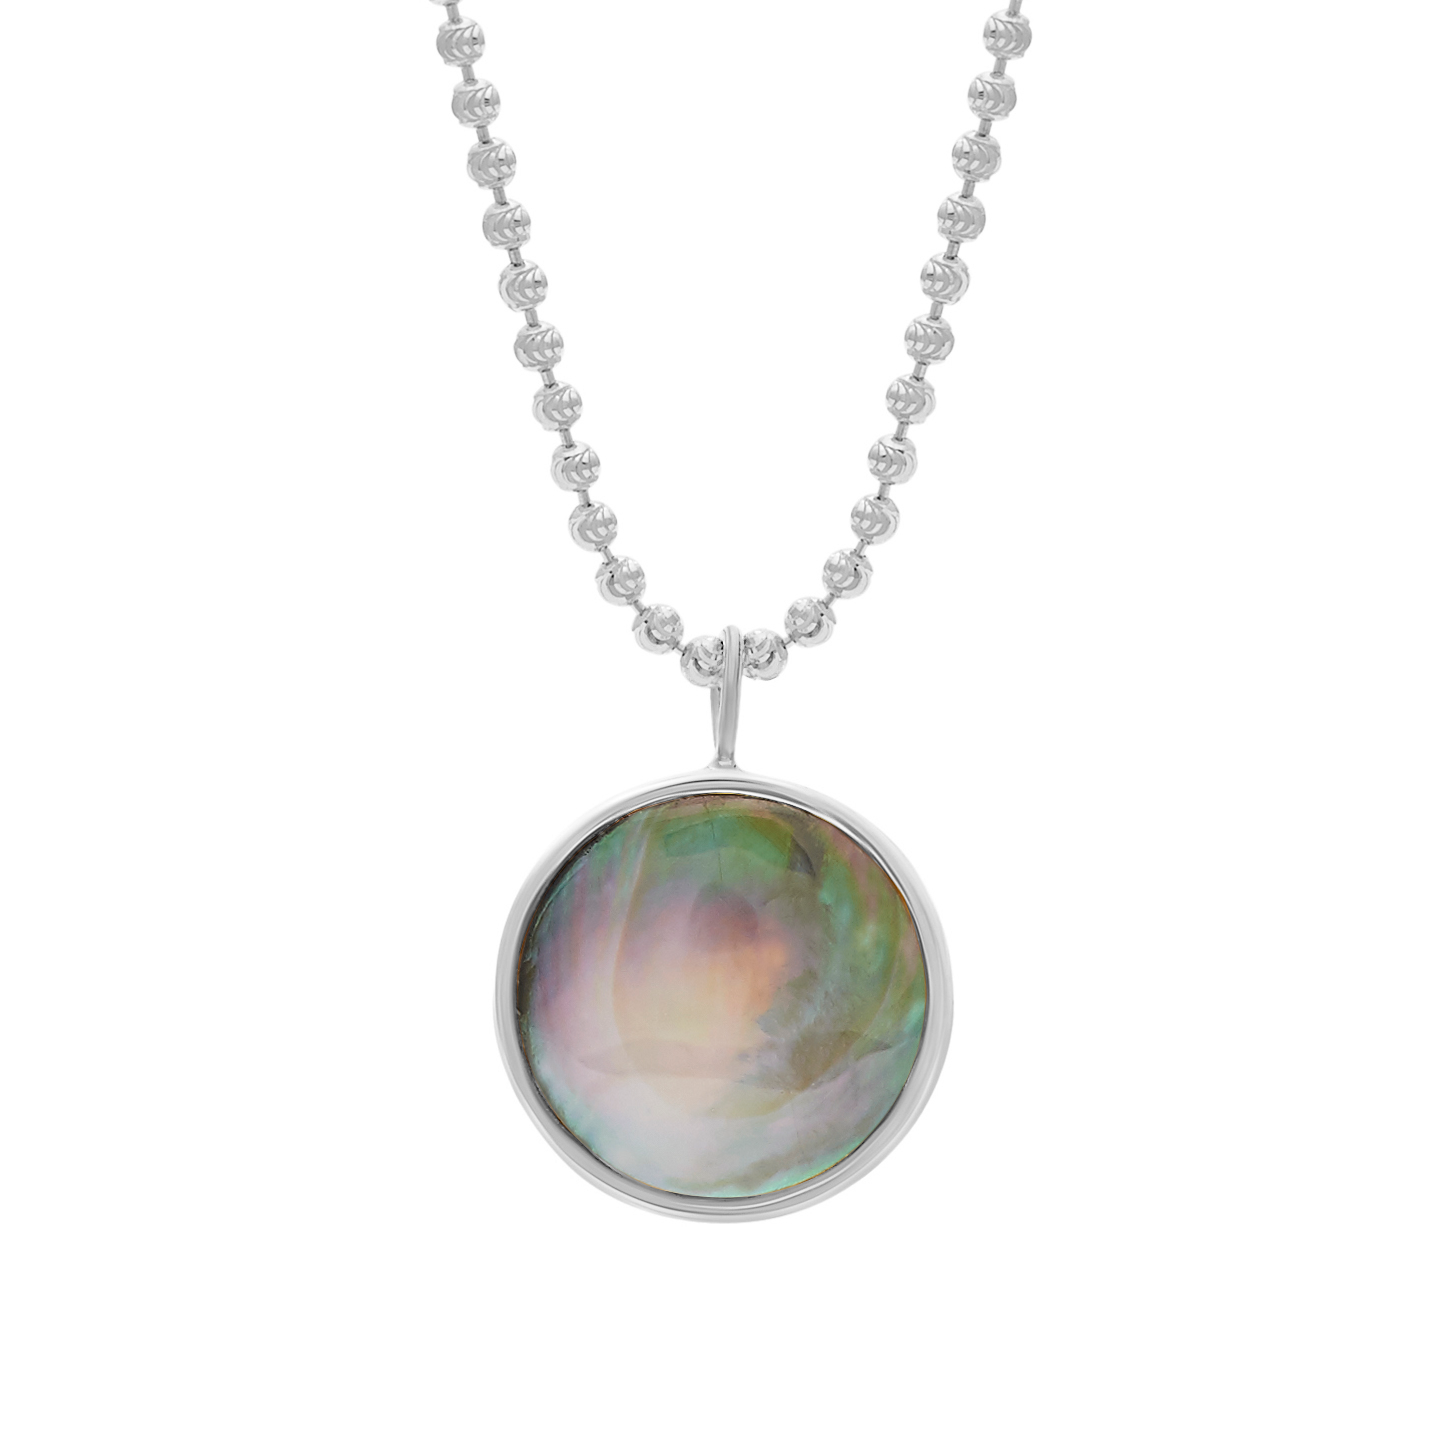 Everett Necklace - Black Mother of Pearl